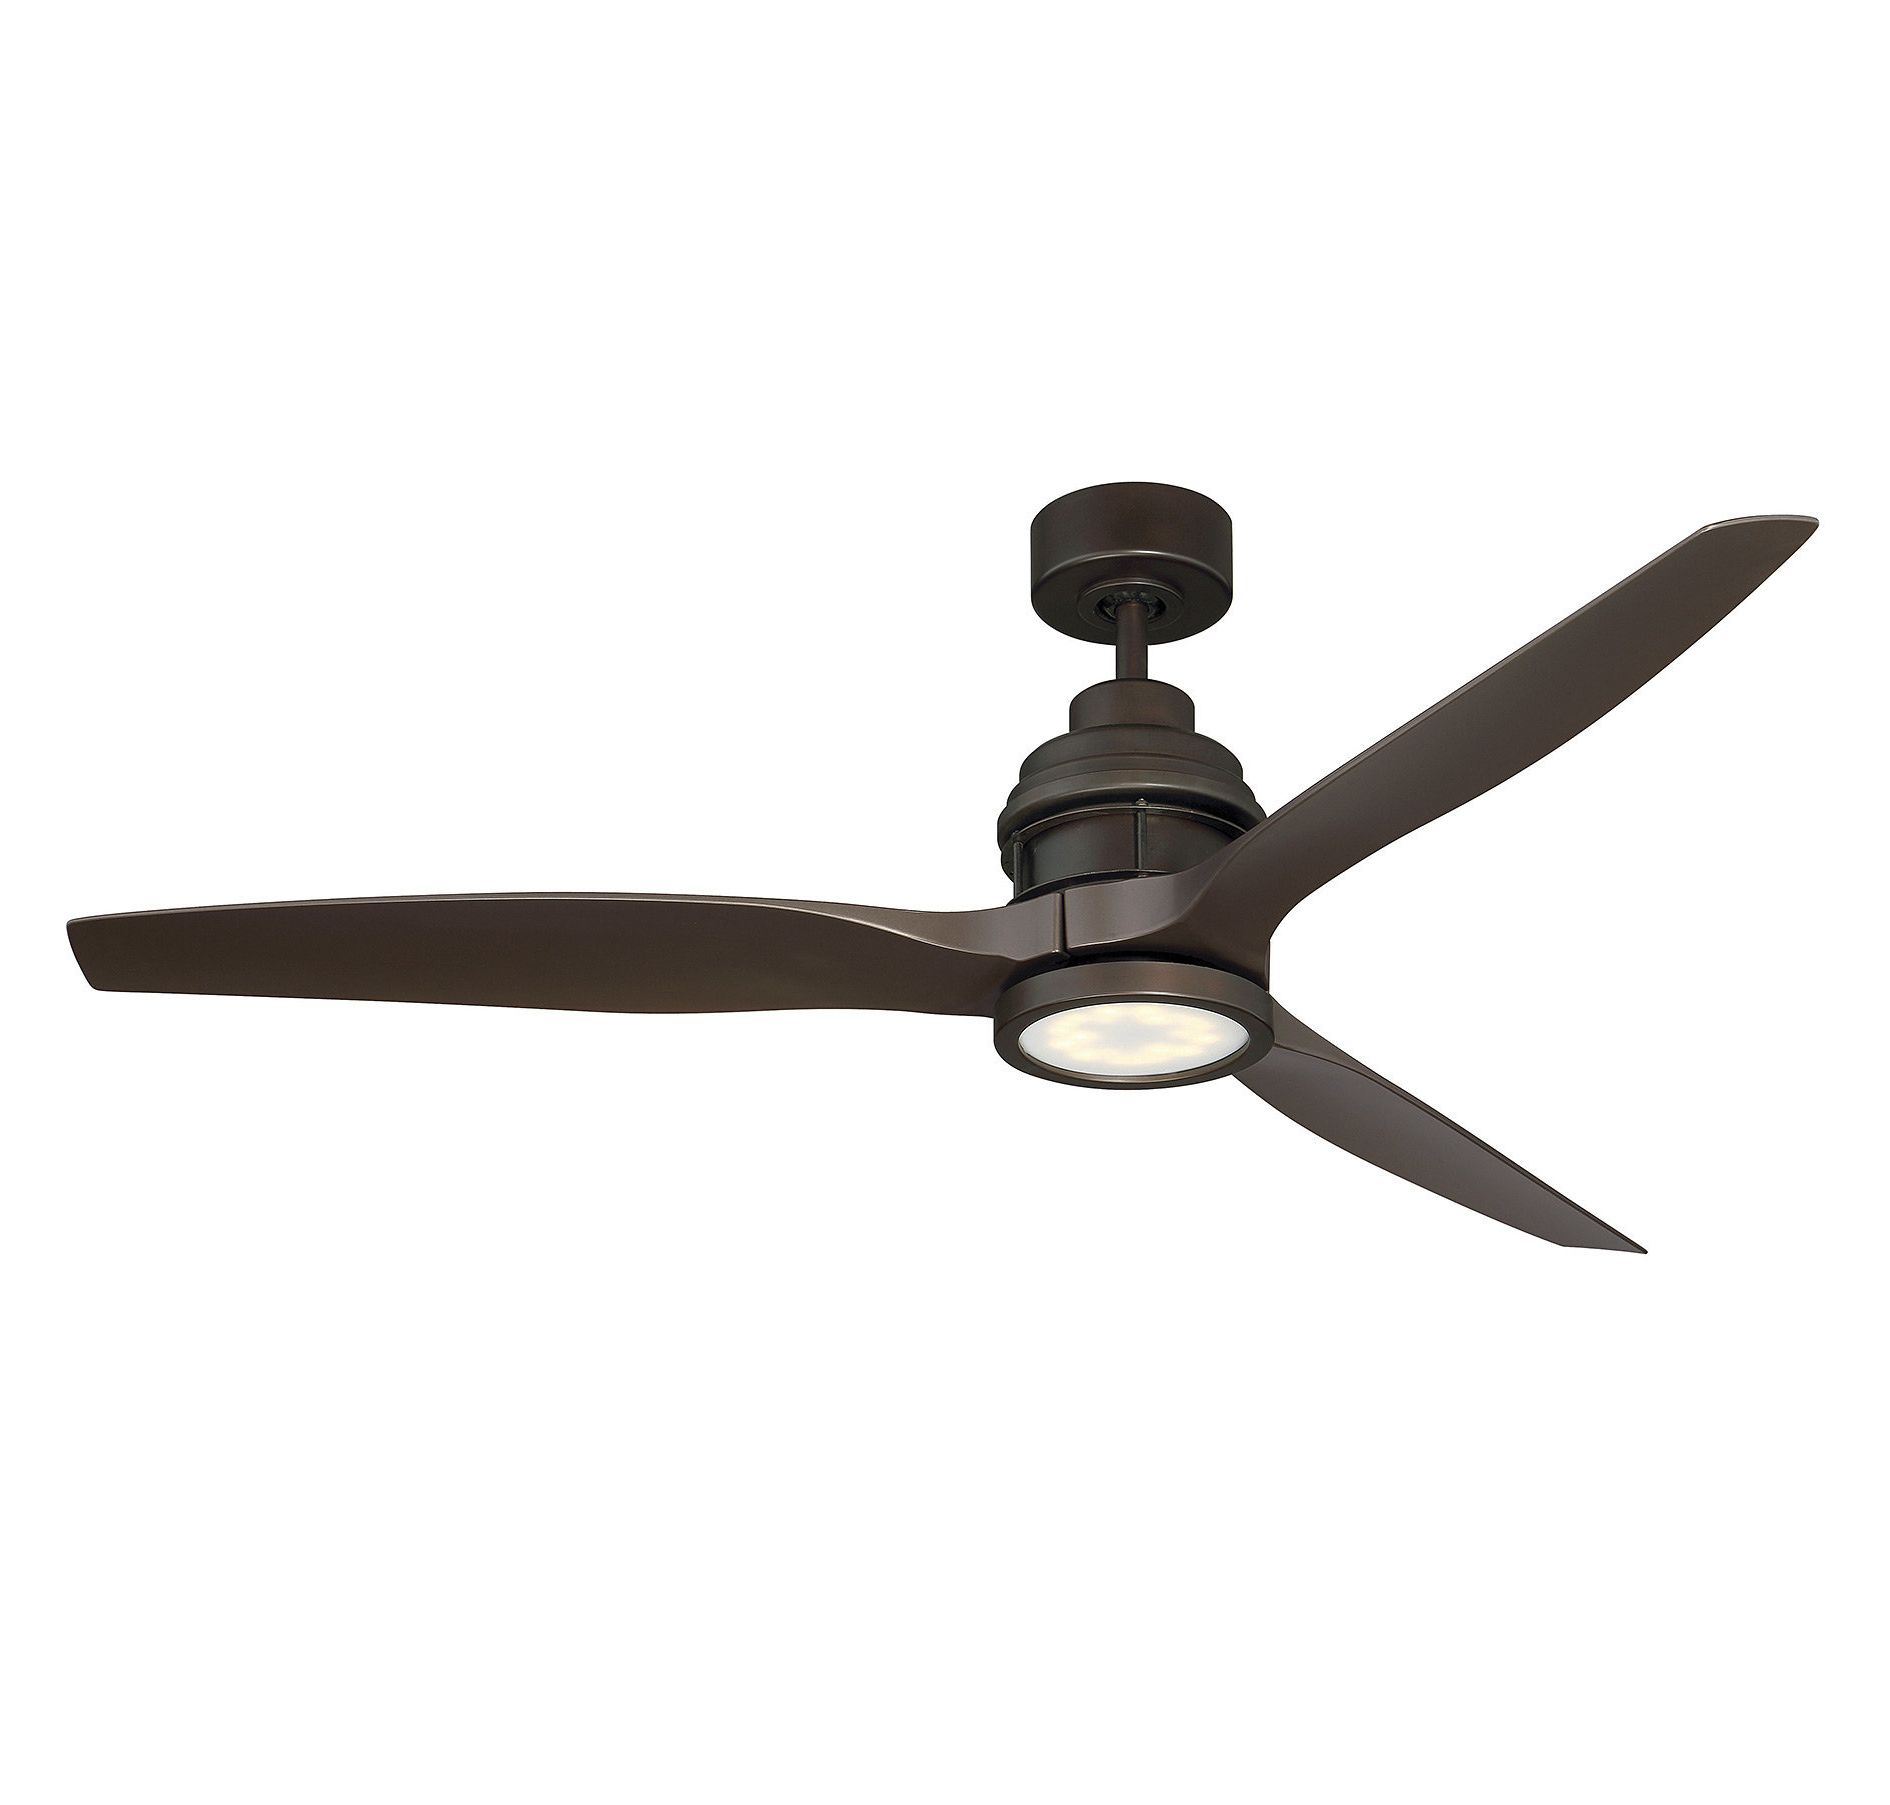 2019 60" Harmoneyq 3 Blade Ceiling Fan With Remote For Dennis 3 Blade Ceiling Fans (View 16 of 20)